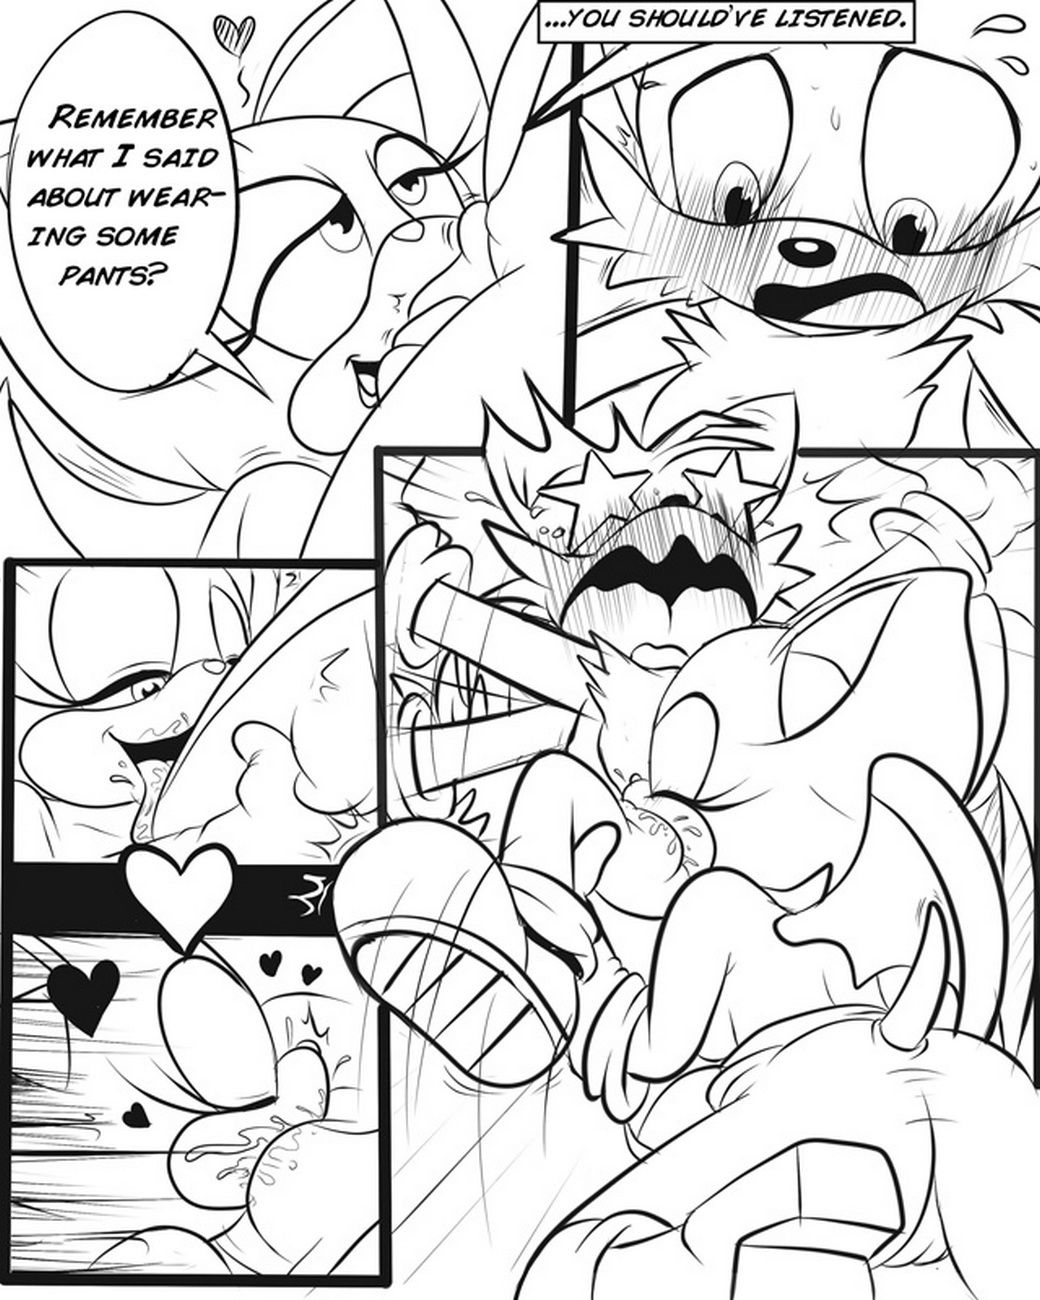 Sonic Rematch page 11